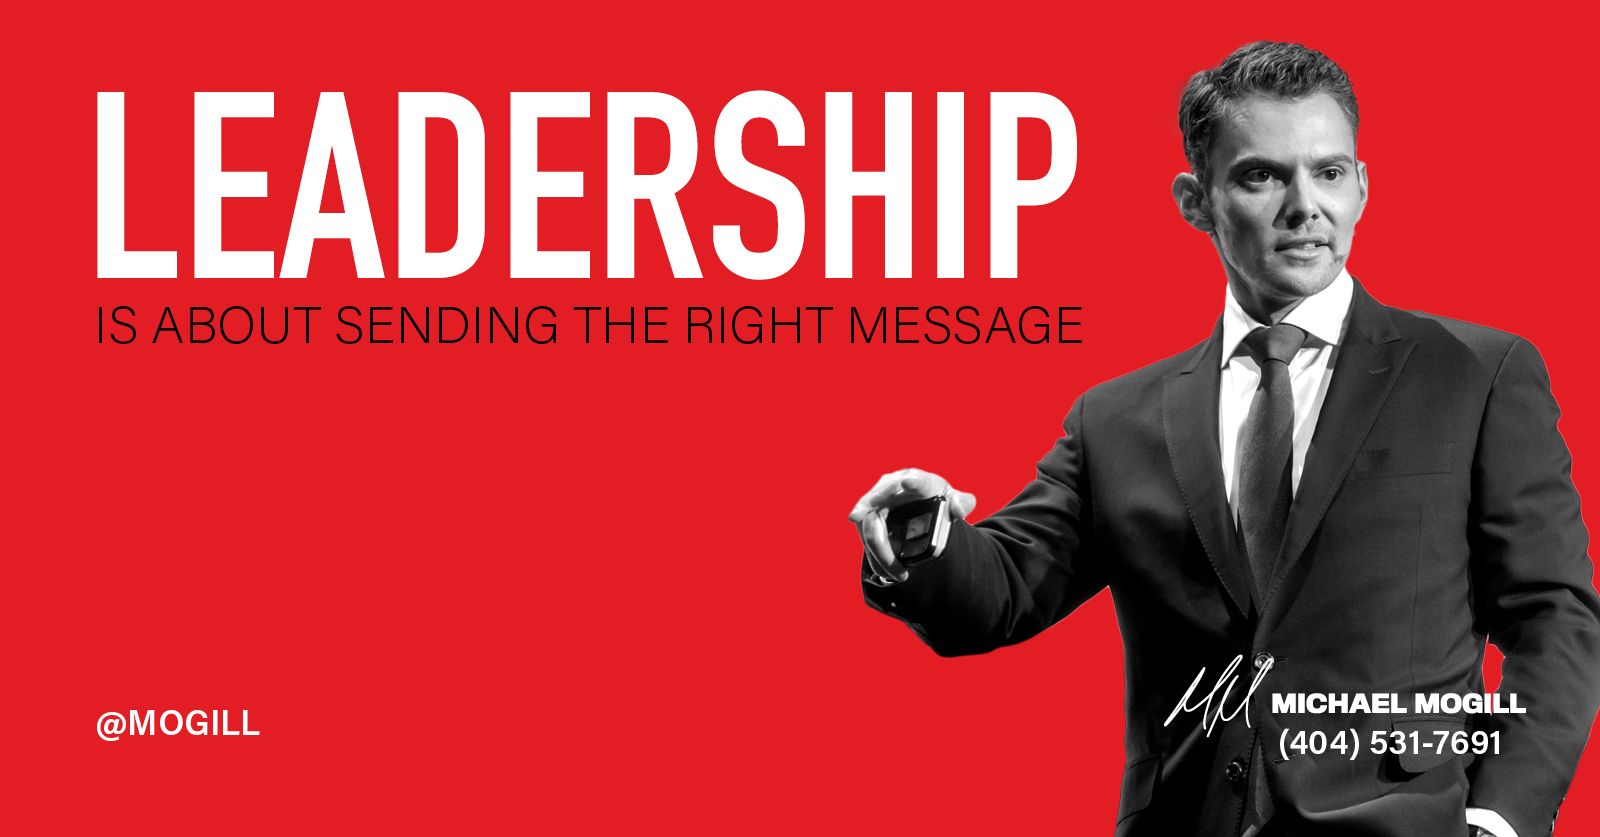 Leadership is About Sending the Right Message